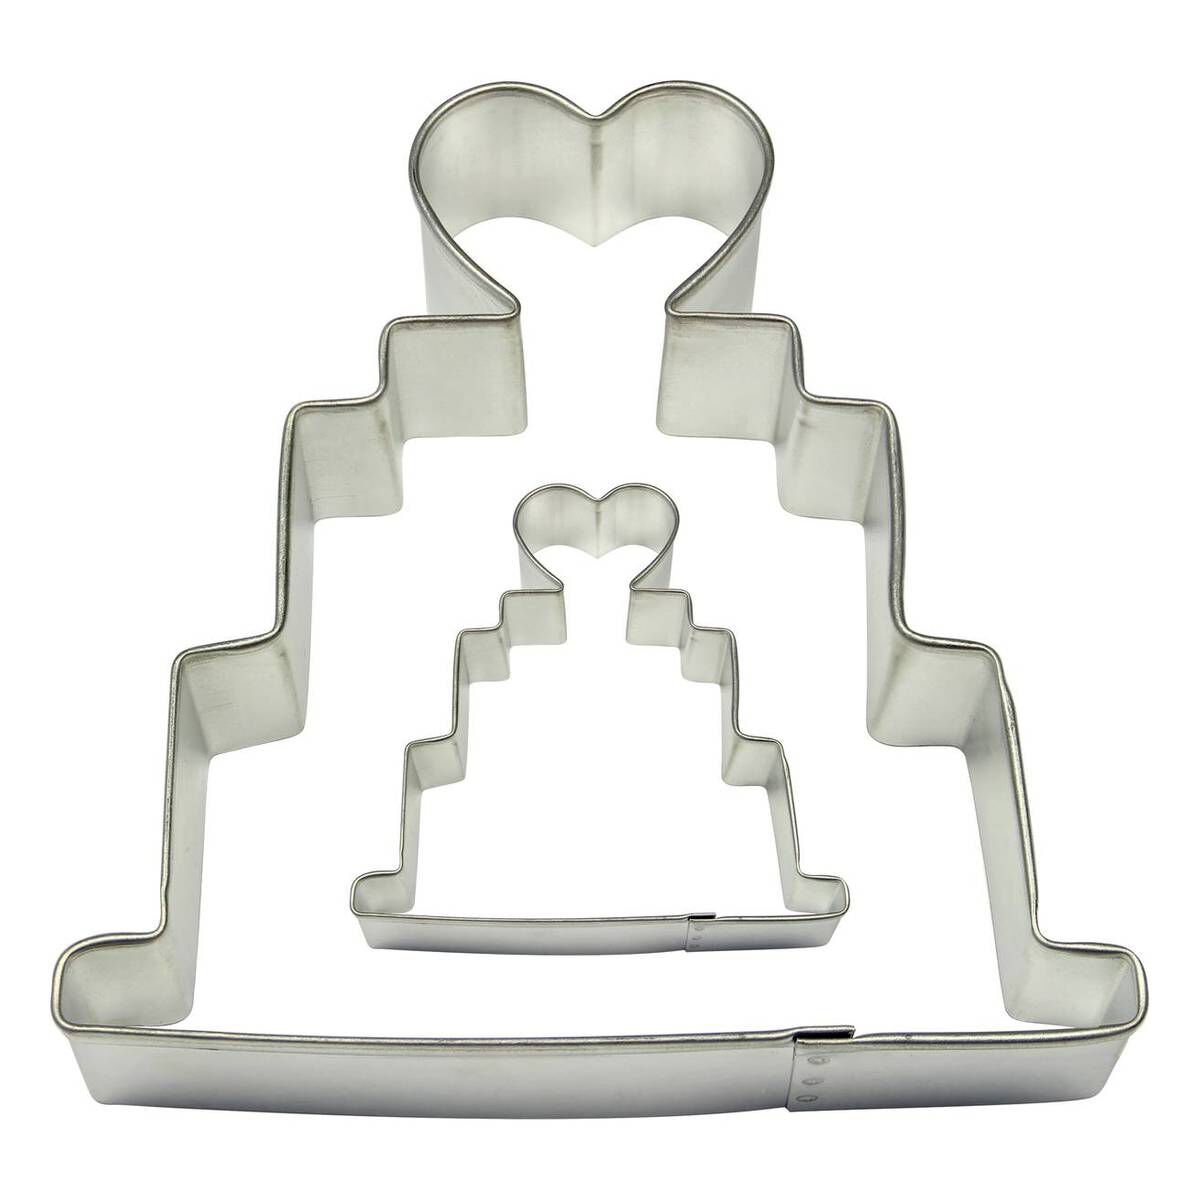 Cake Slice with Candle Cookie Cutter – The Flour Box